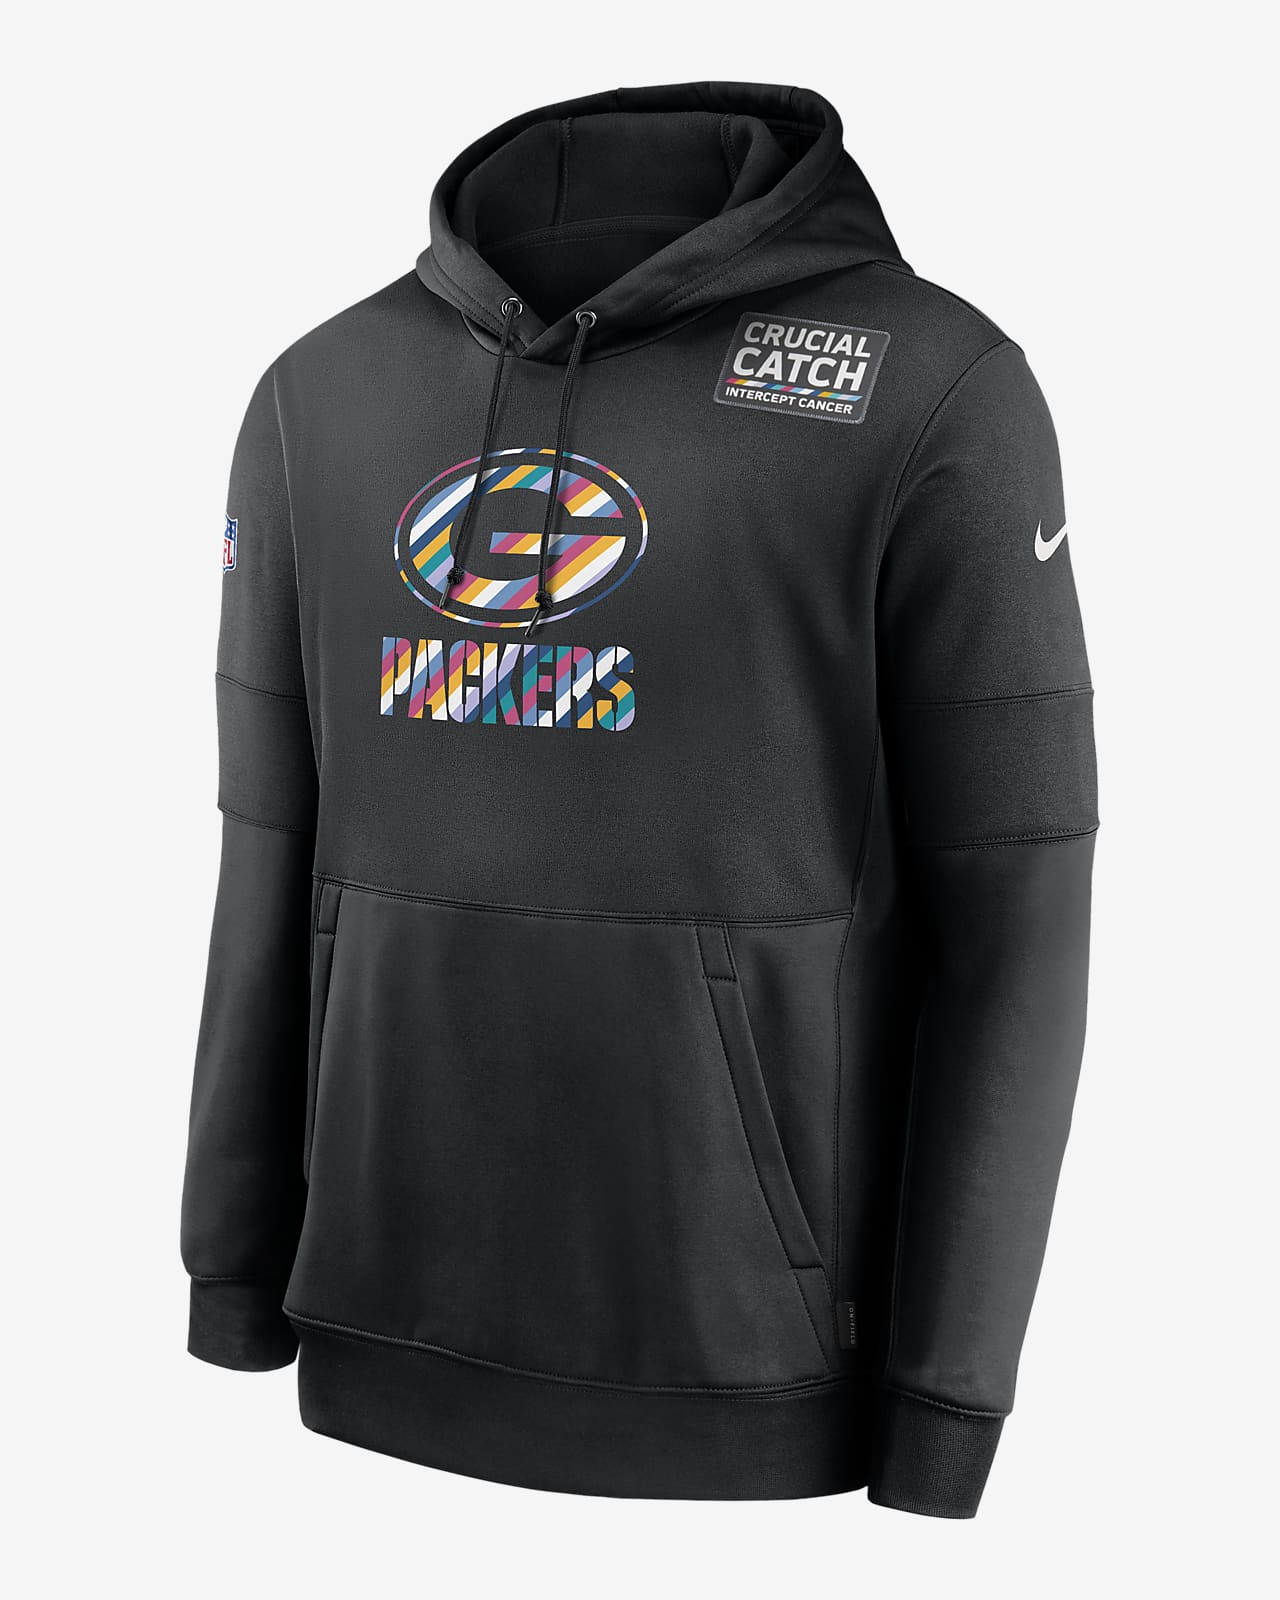 Sudadera con capucha para hombre Nike Therma Crucial Catch (NFL Packers).  Nike.com